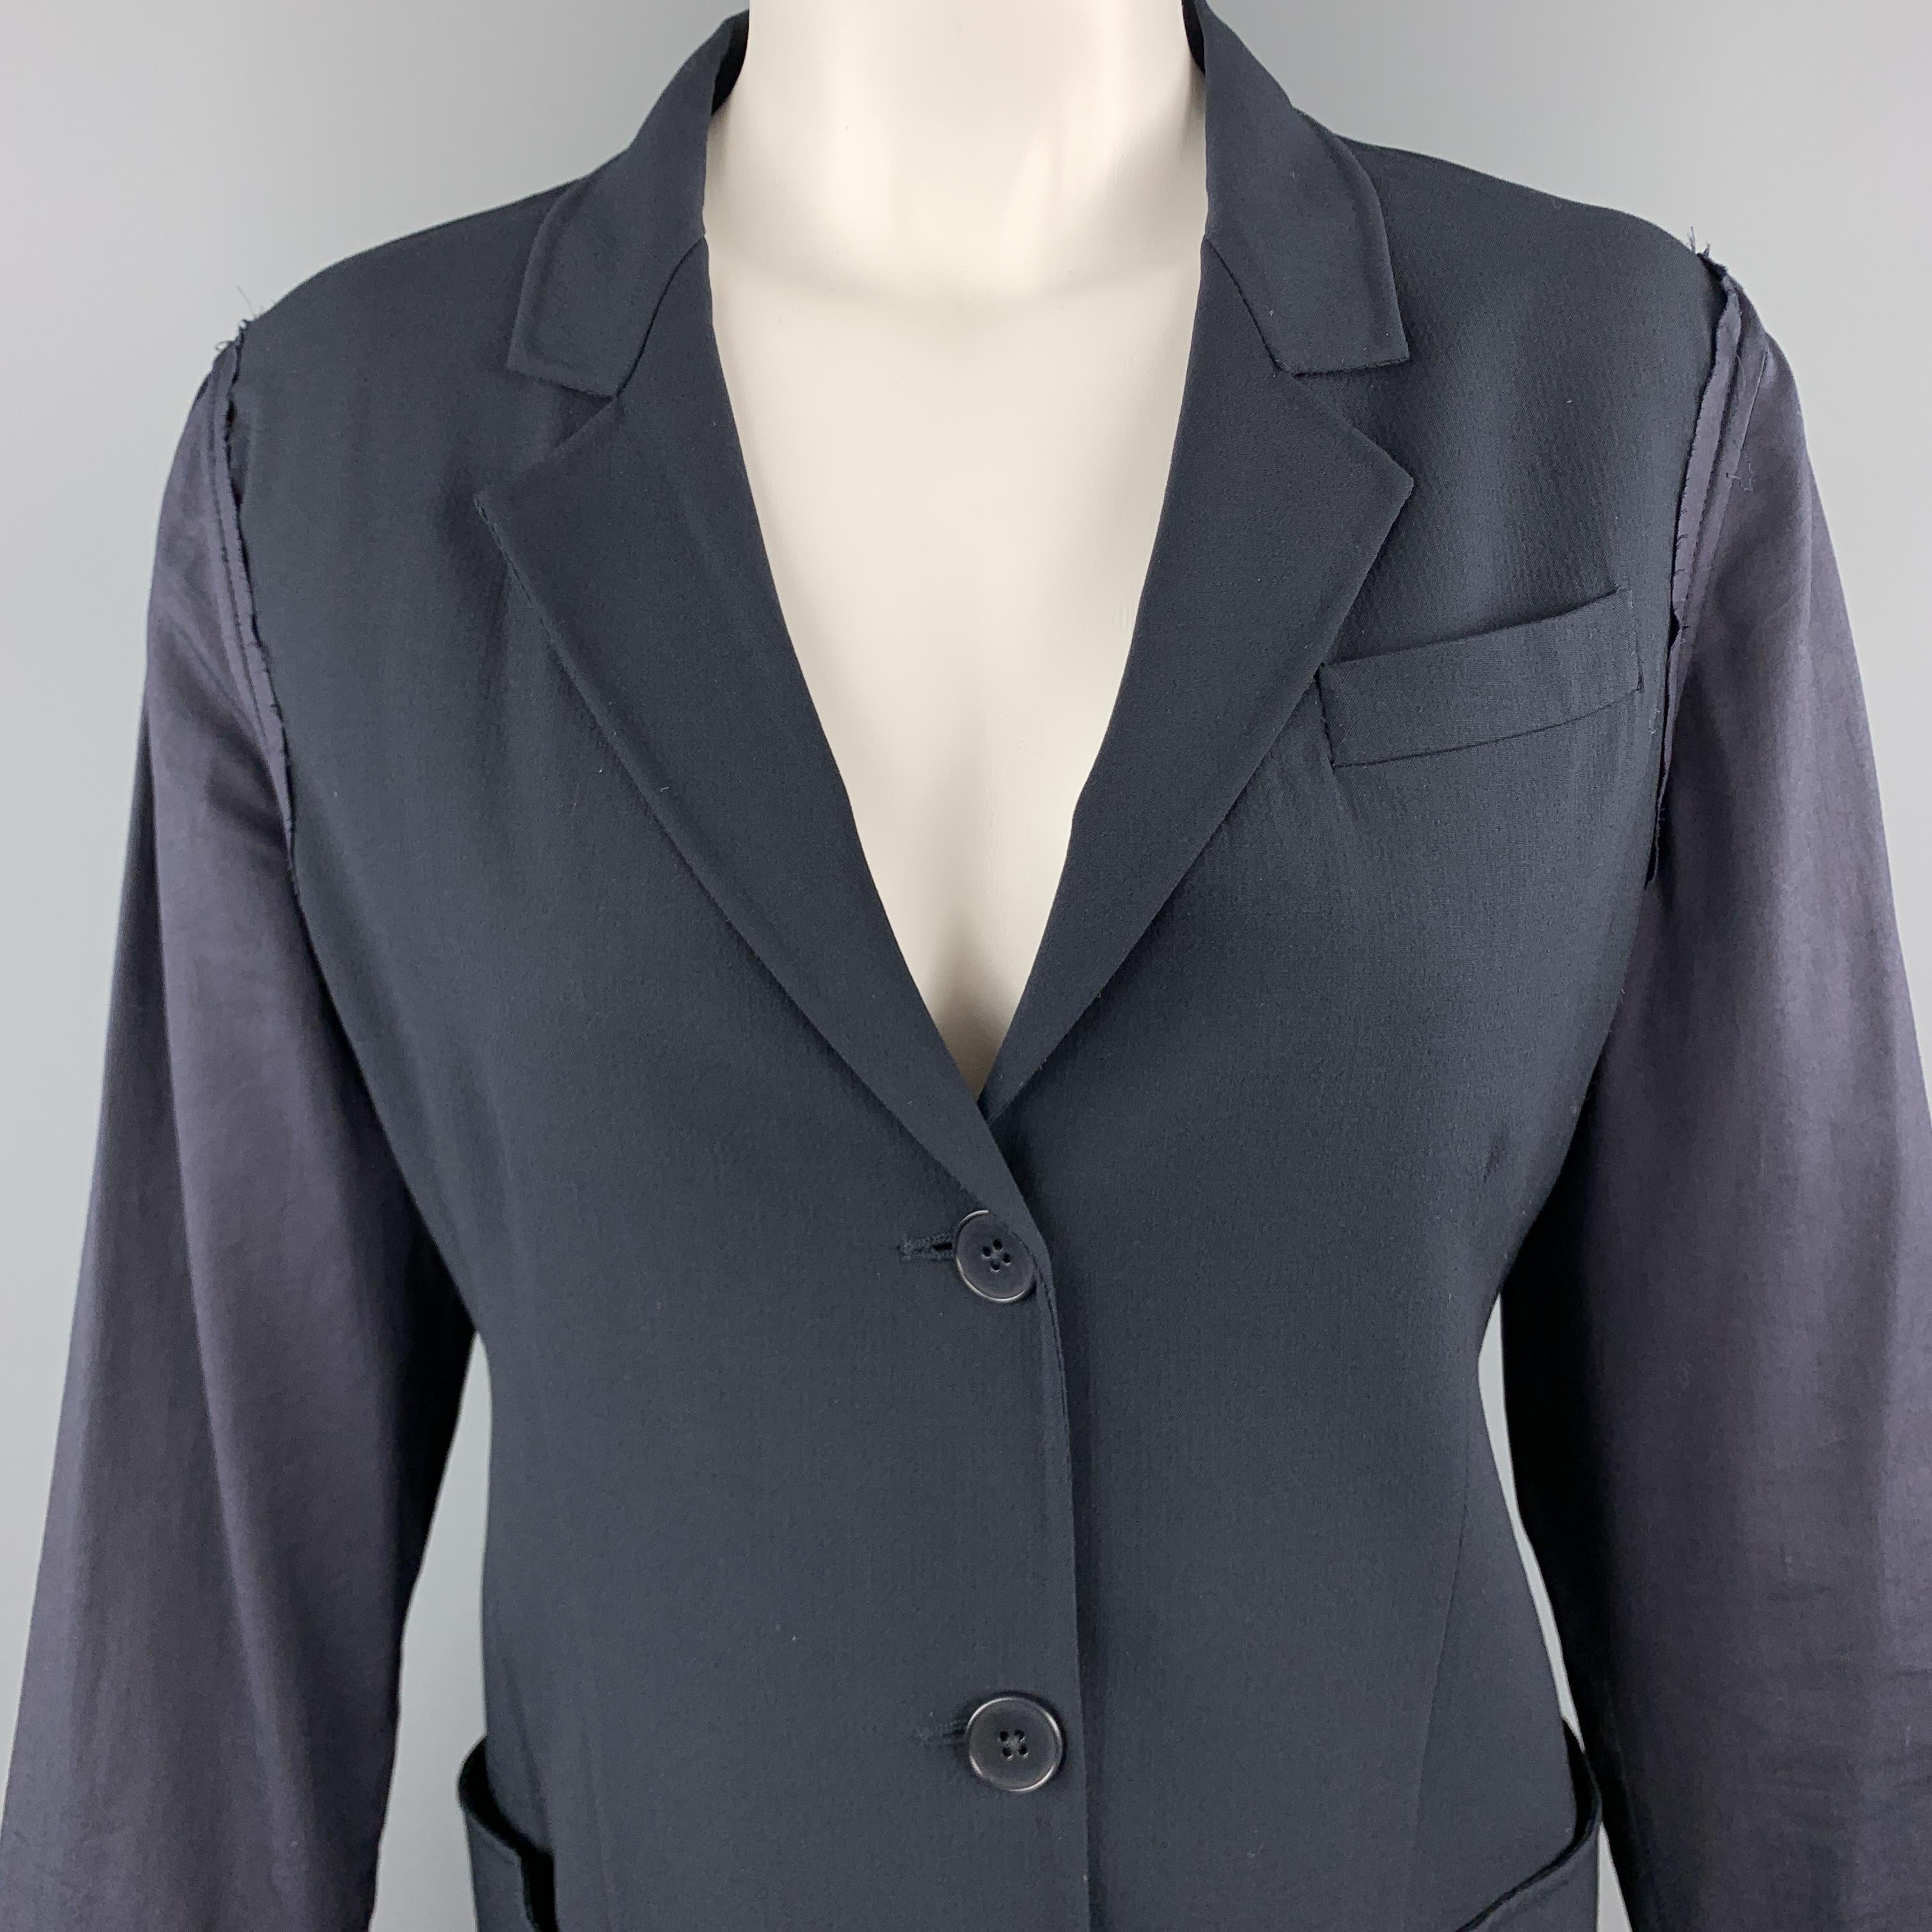 JIL SANDER blazer comes in navy wool blend fabric with a notch lapel, single breasted three button front, patch pockets, and silk blend frayed edge sleeves. Made in Italy.

Excellent Pre-Owned Condition.
Marked: IT 36

Measurements:

Shoulder: 16